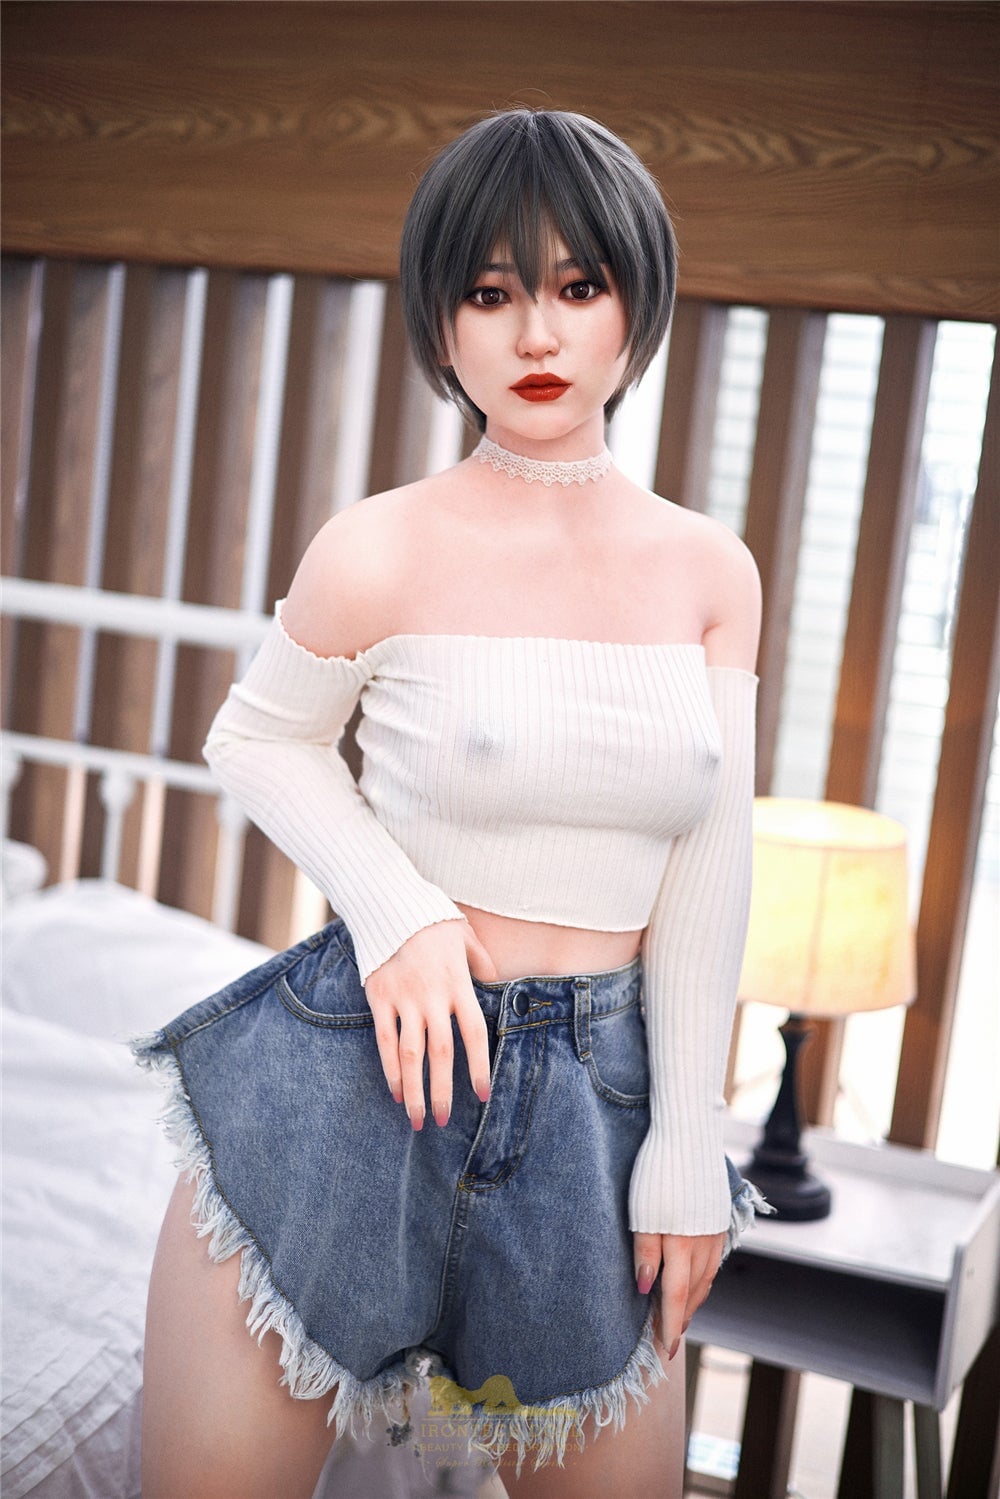 Miko Silicone Sex Doll - IronTech Doll® Irontech Doll®